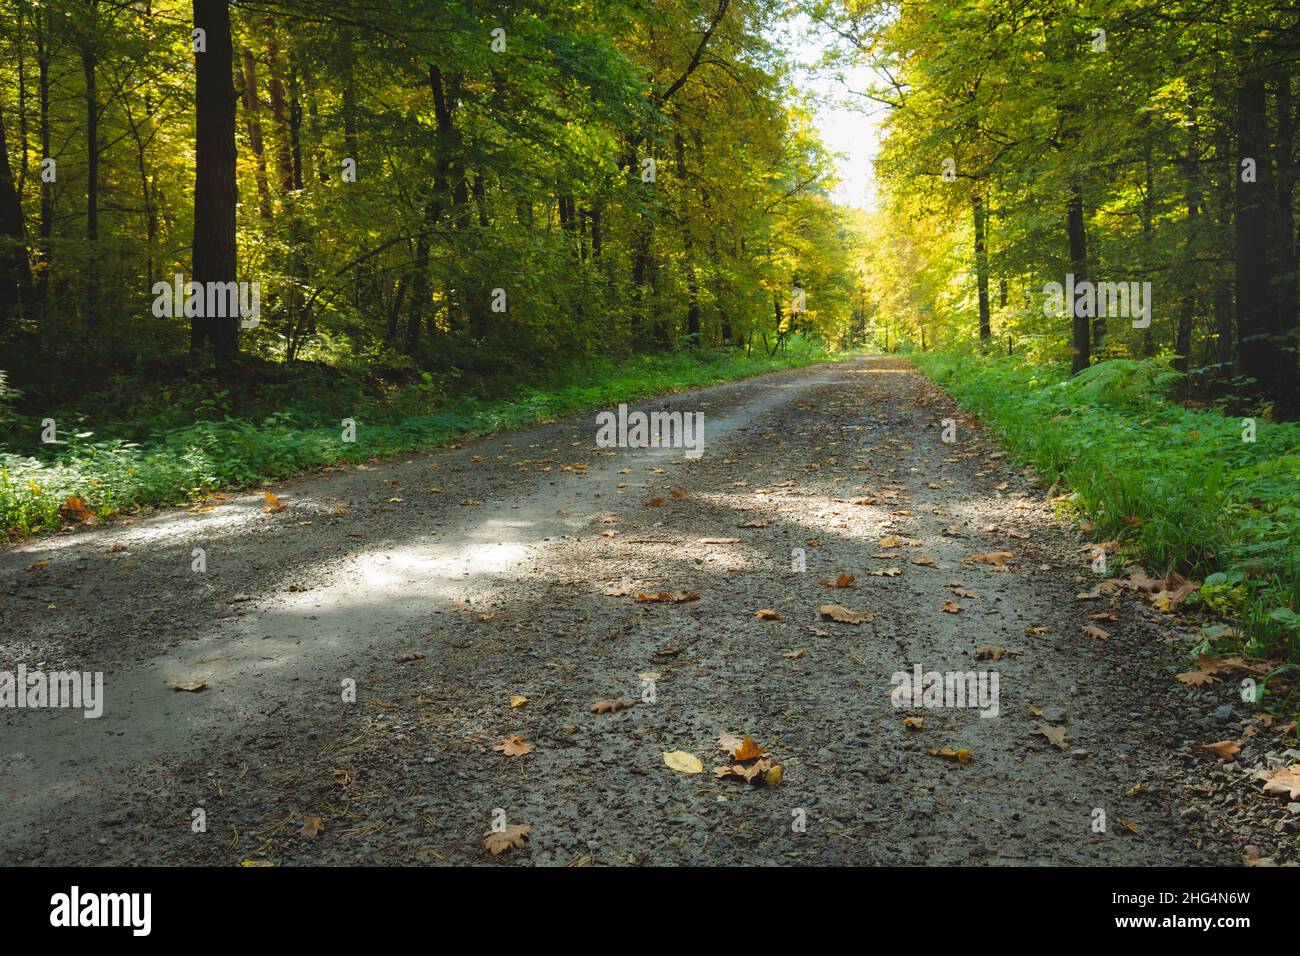 The road through the forest and the first fallen leaves, October day Stock Photo